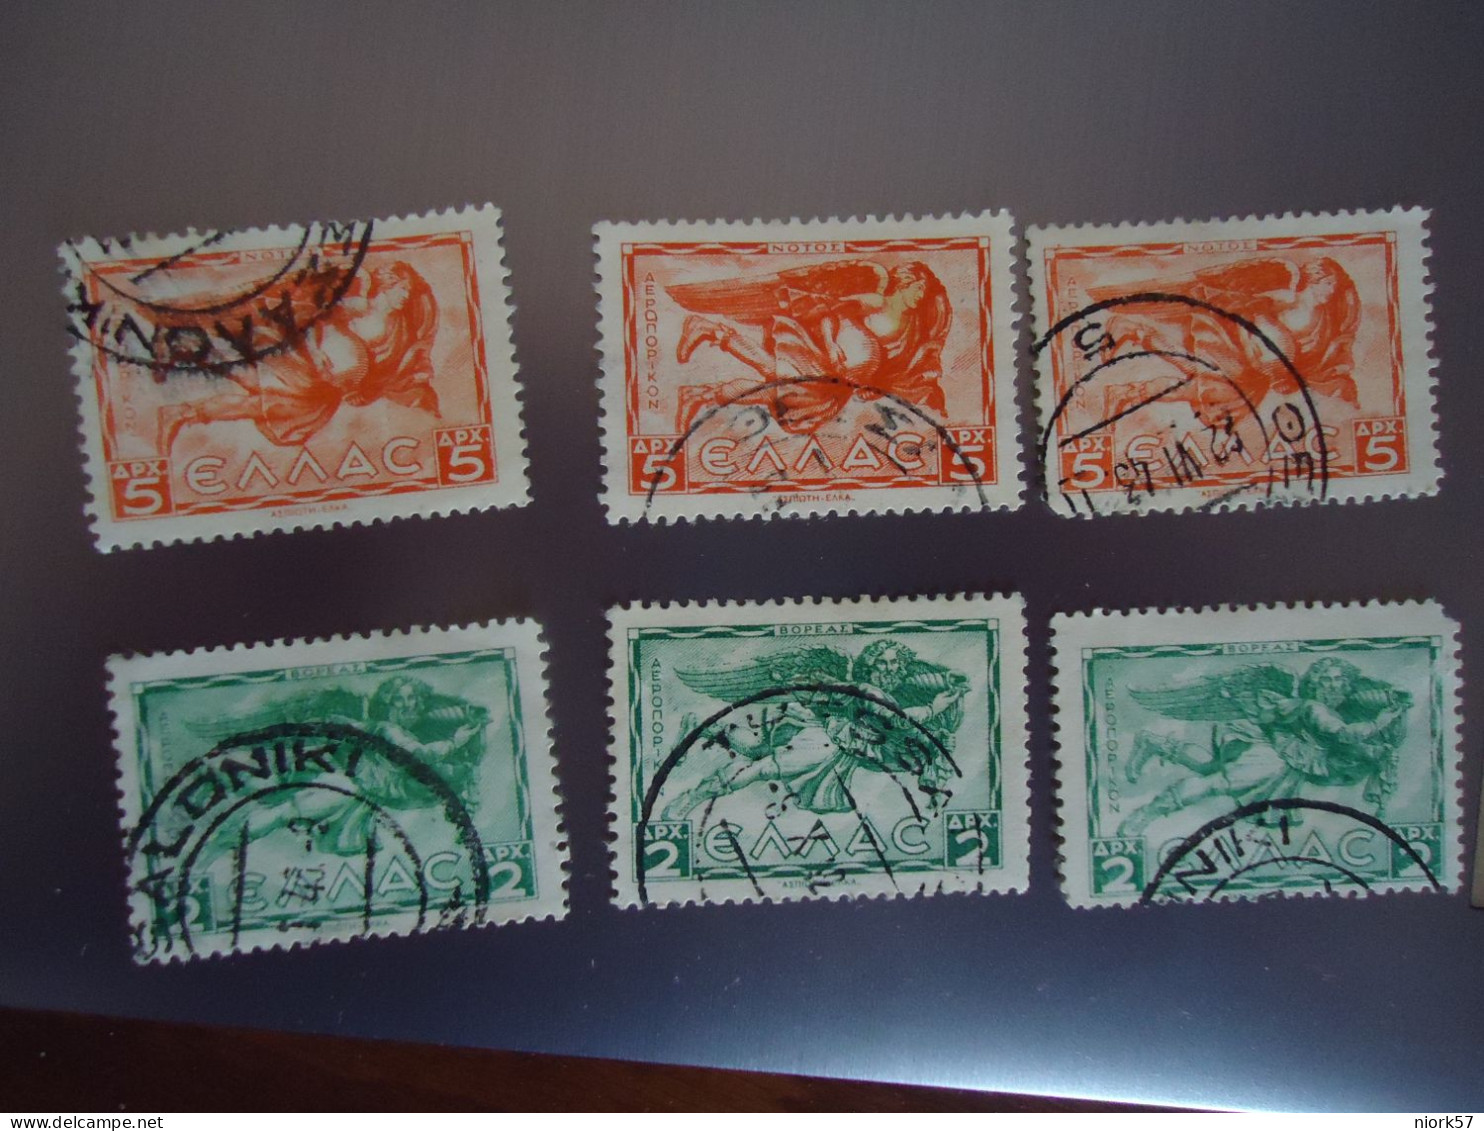 GREECE  USED  6 STAMPS  1942-  AIR WINDS - Automatenmarken [ATM]